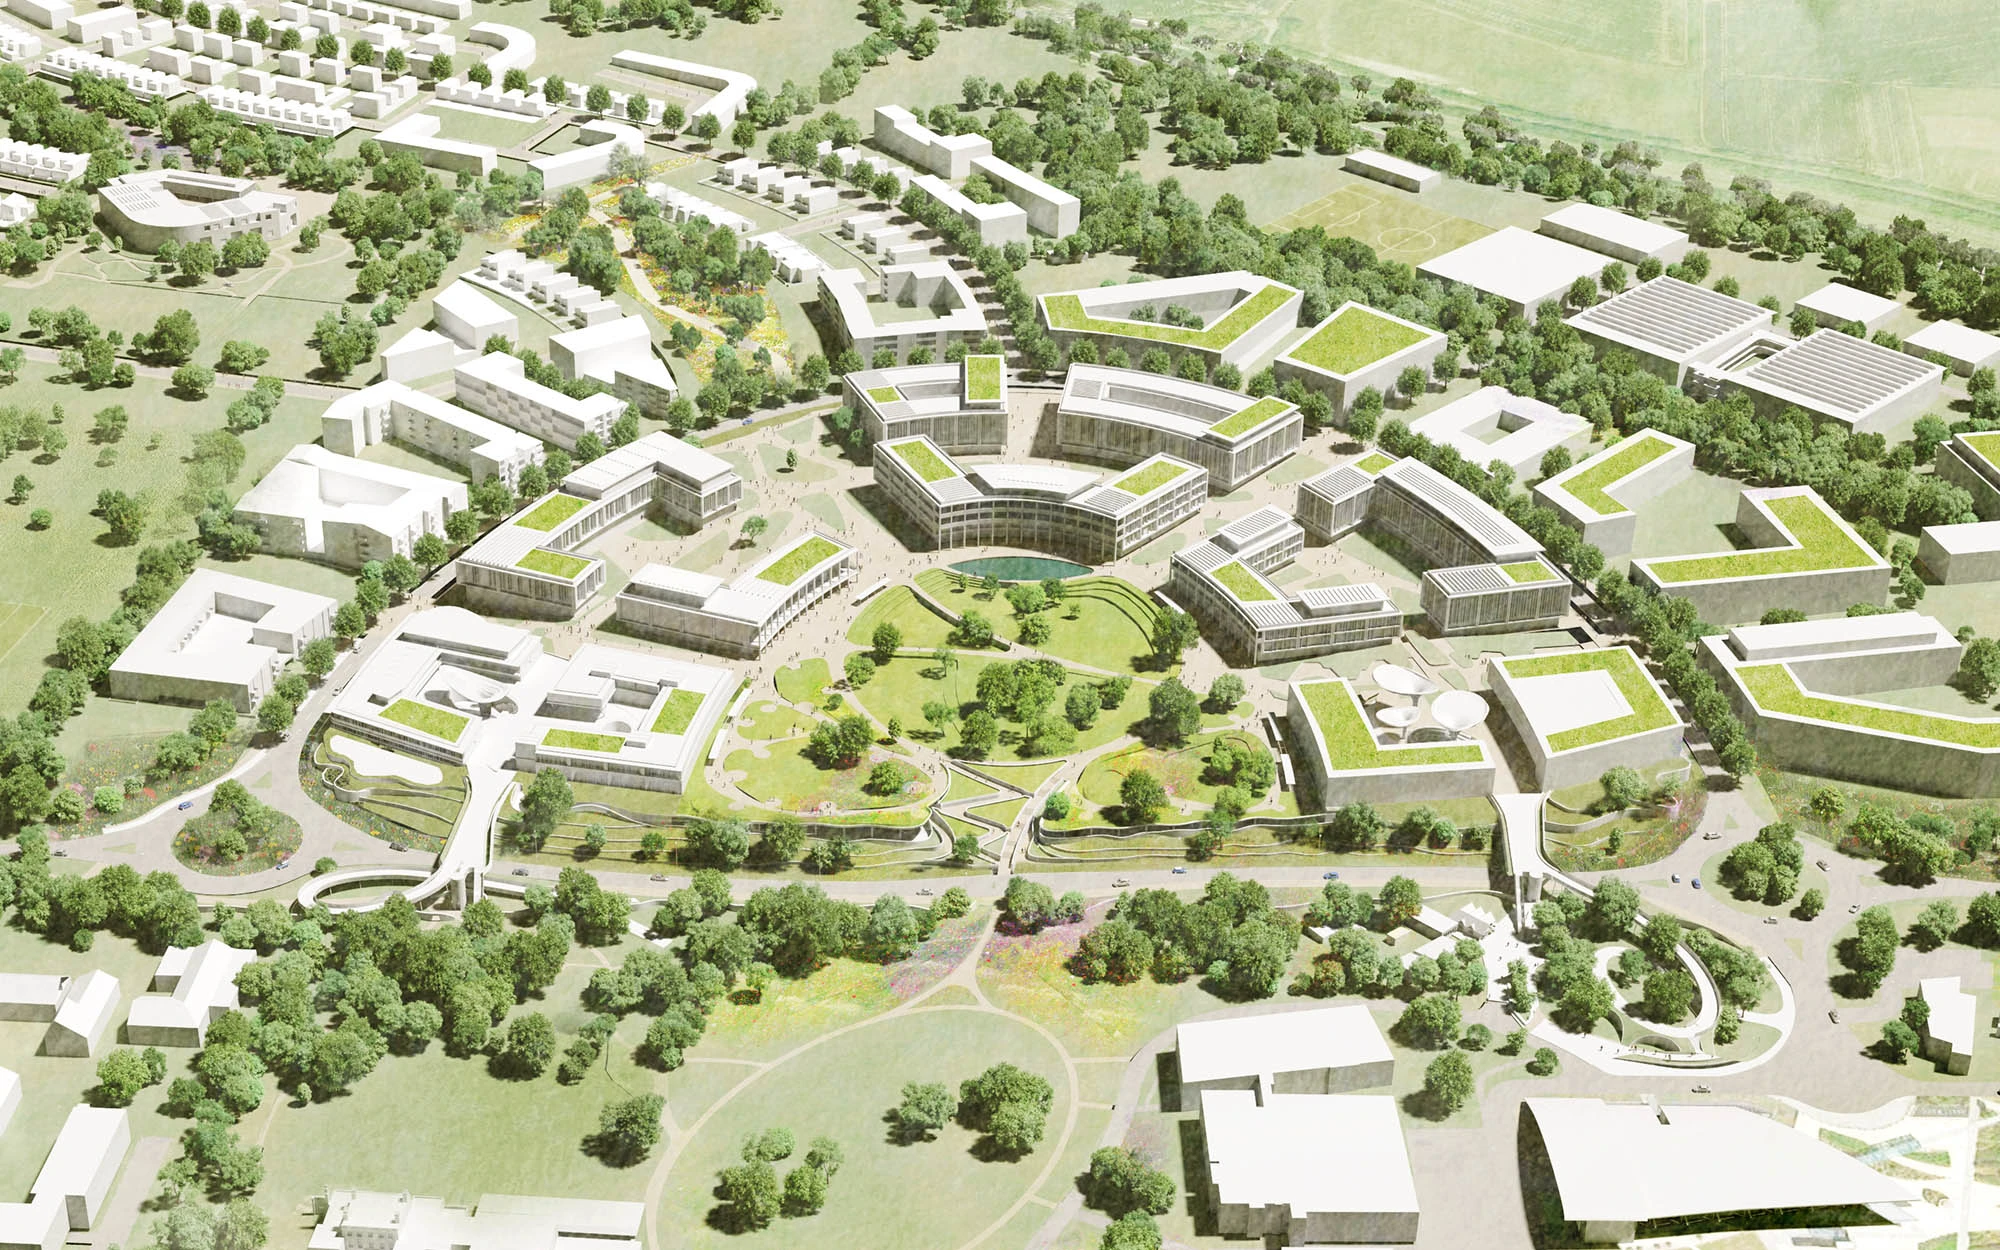 Rendered masterplan of Wellcome Genome Campus